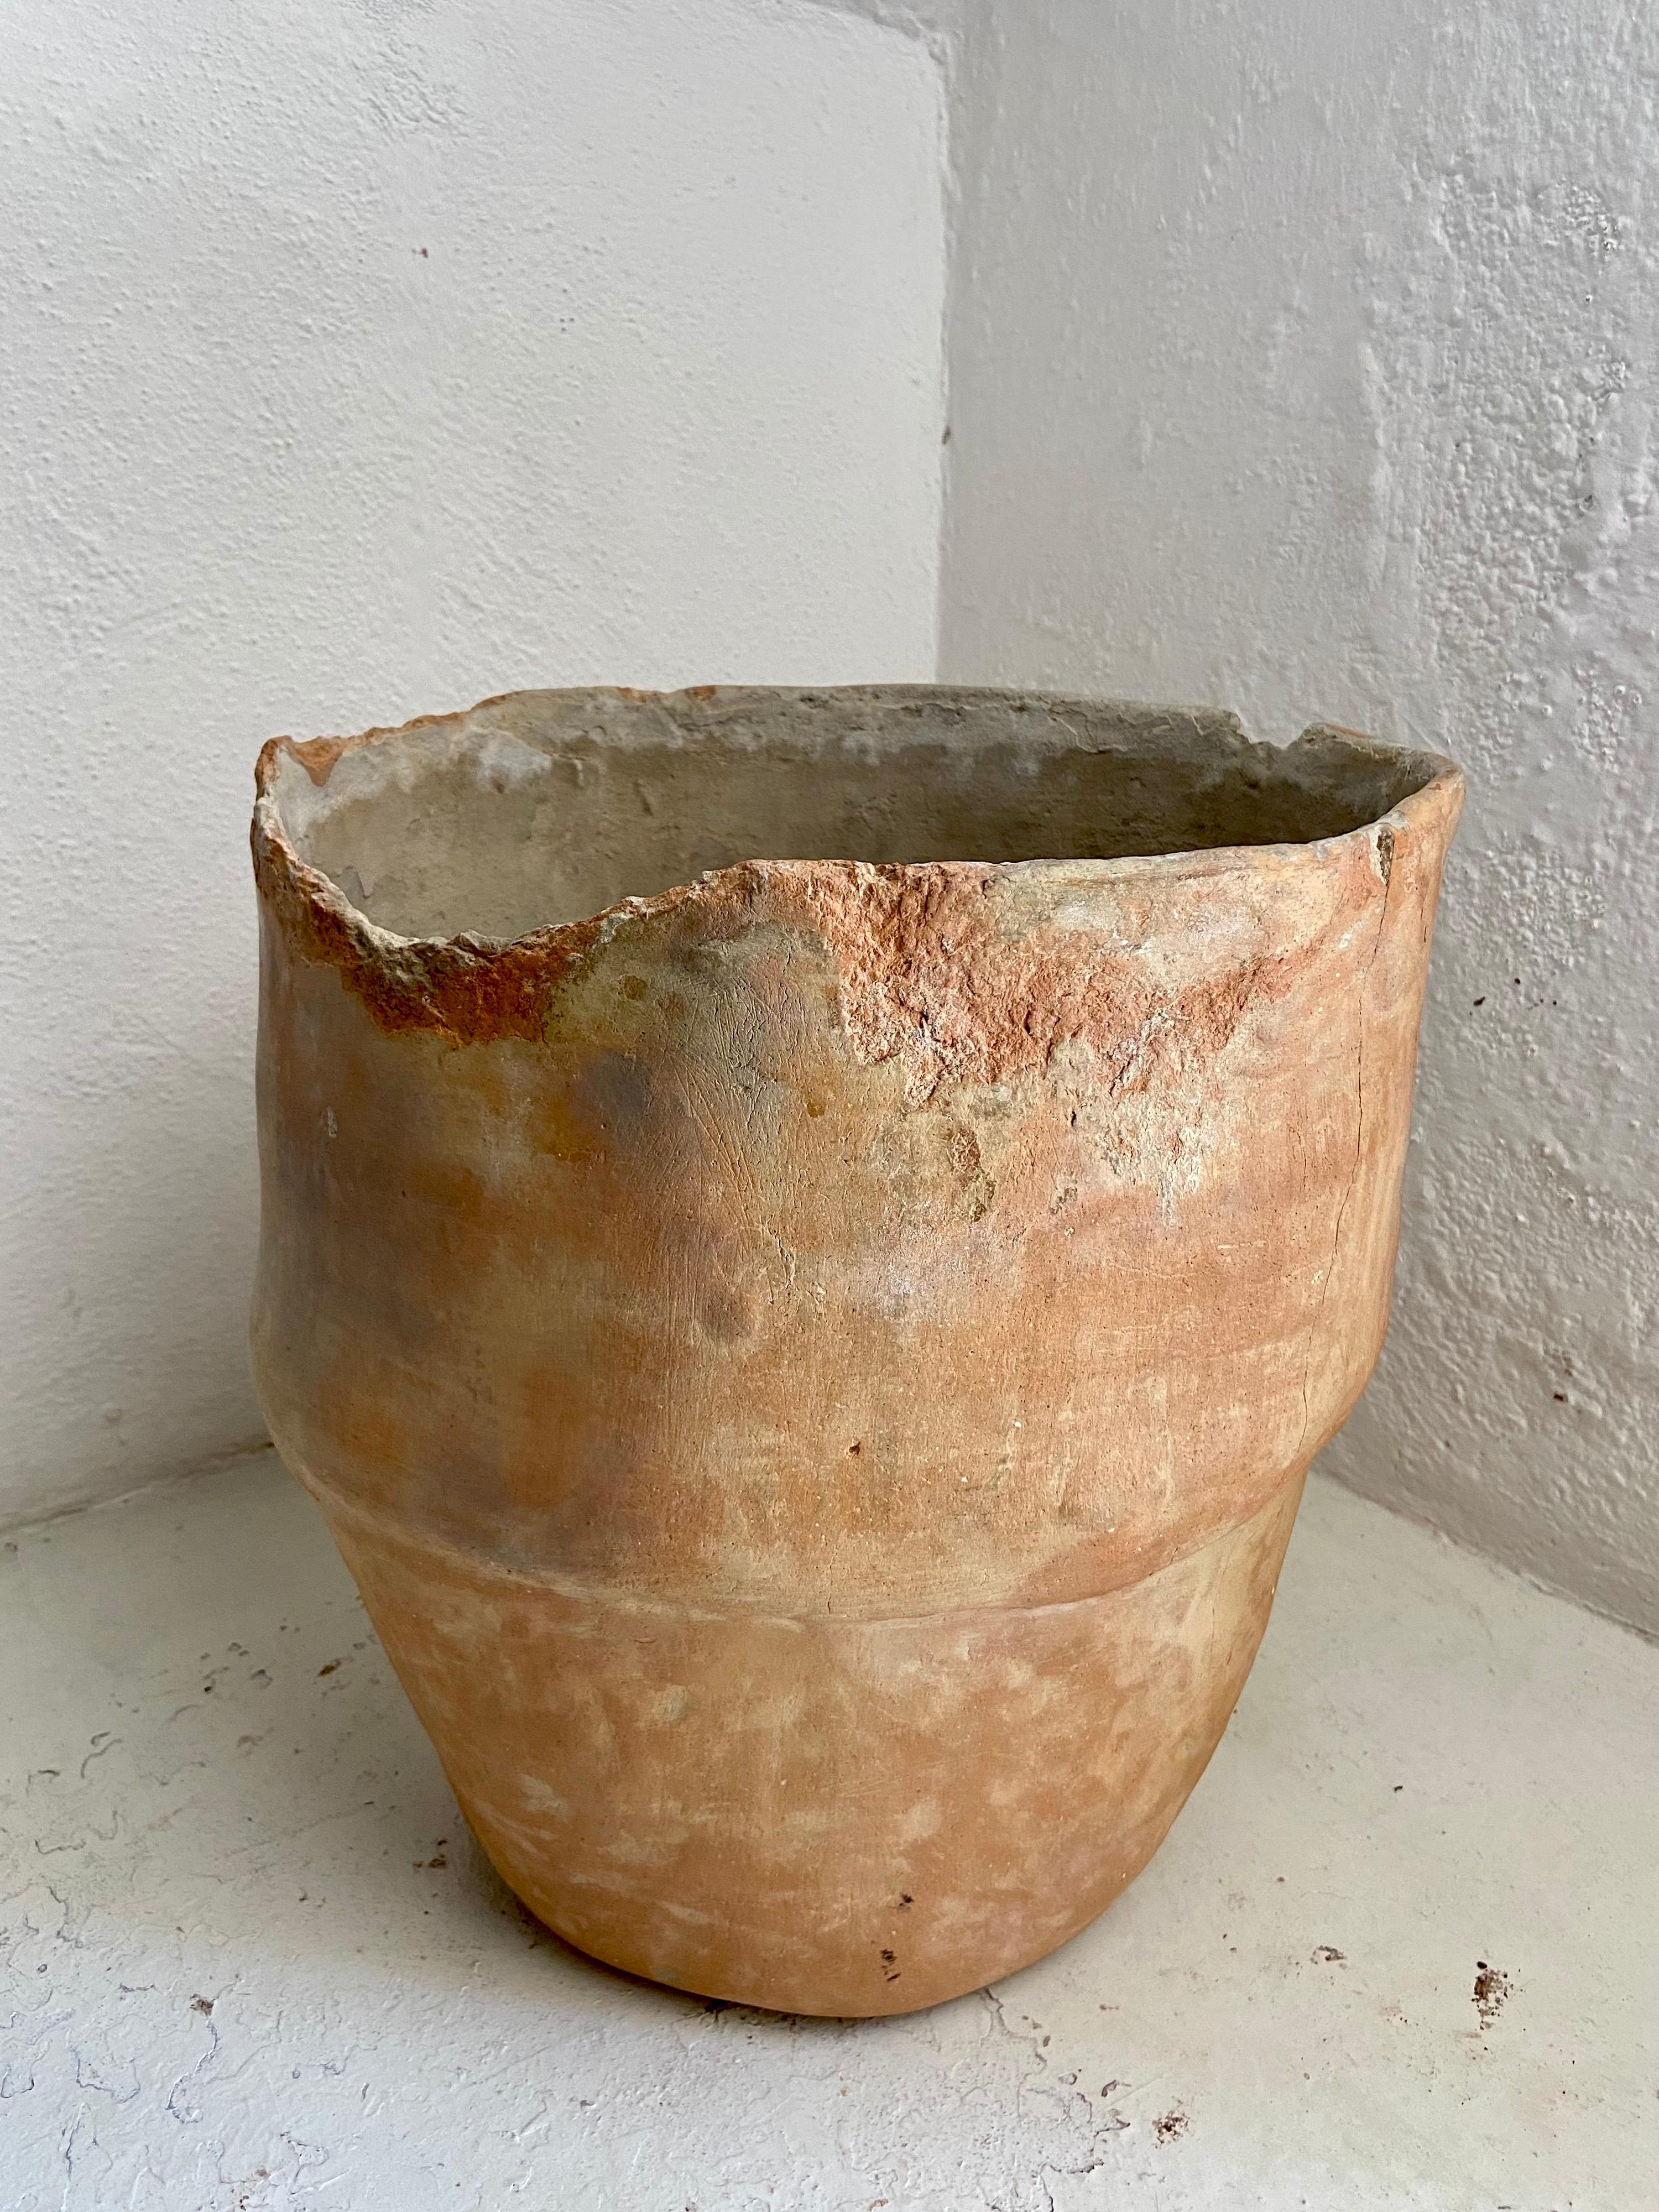 Early 20th century water pot from the bordering area of Oaxaca and Veracruz. These pots have their particular style of expanding in diameter half way up. The style also includes 2 small knobs on either side of the rim circumference. The rim on this